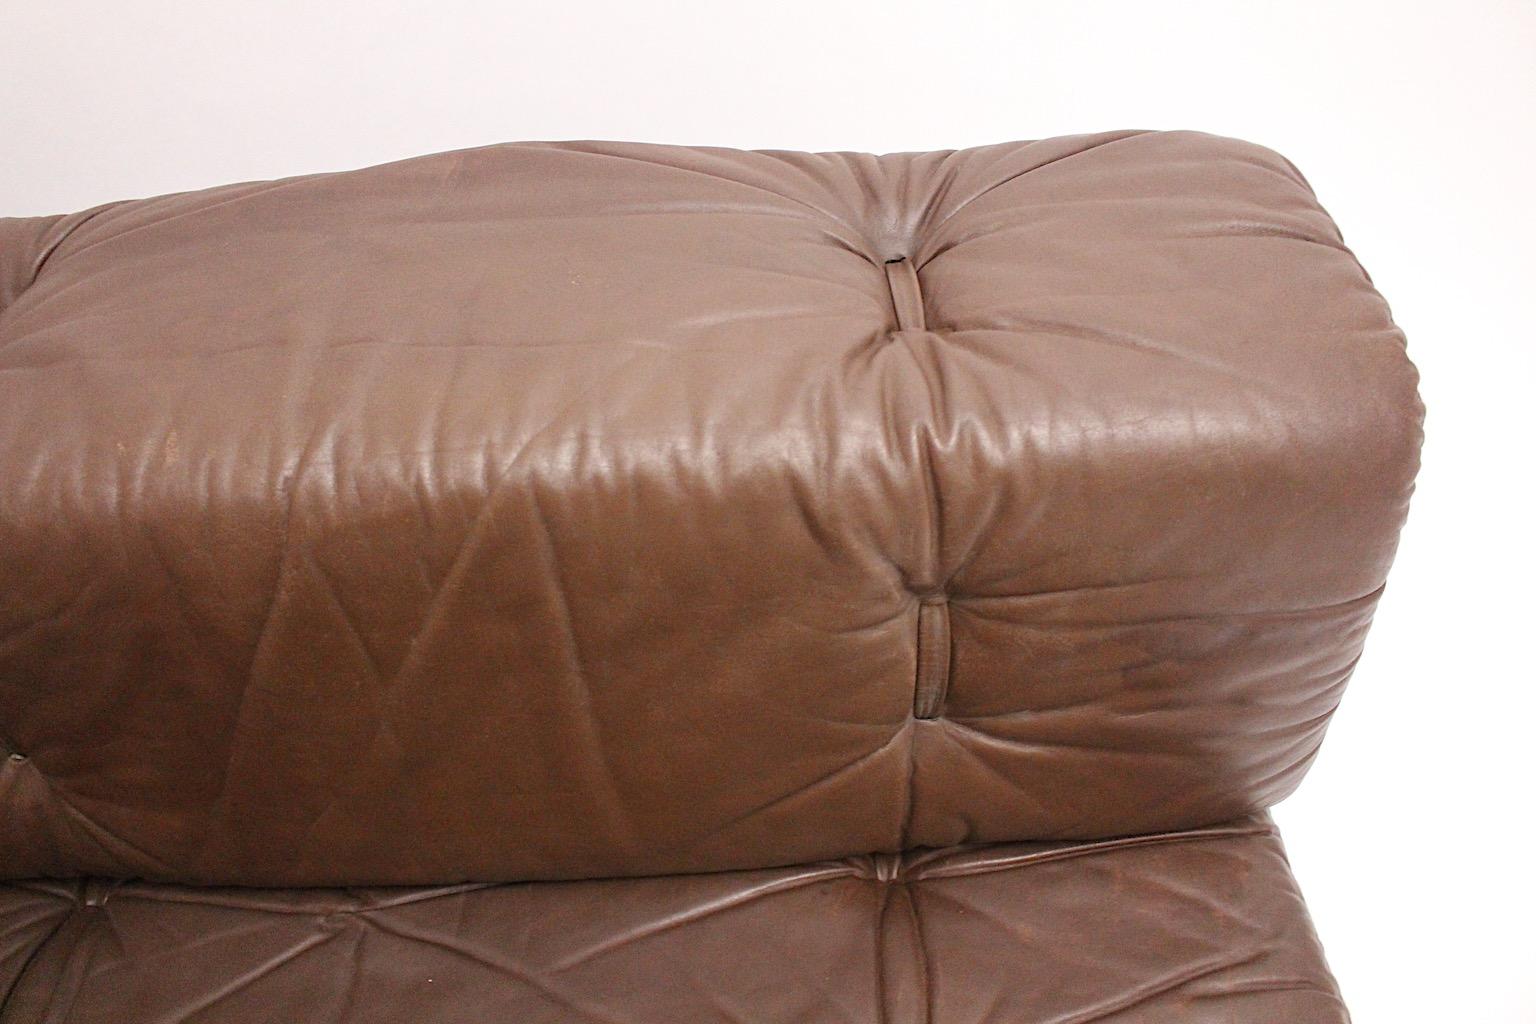 Wittmann Leather Brown Vintage Sofa or Daybed Atrium De Sede Style 1970s Austria For Sale 8